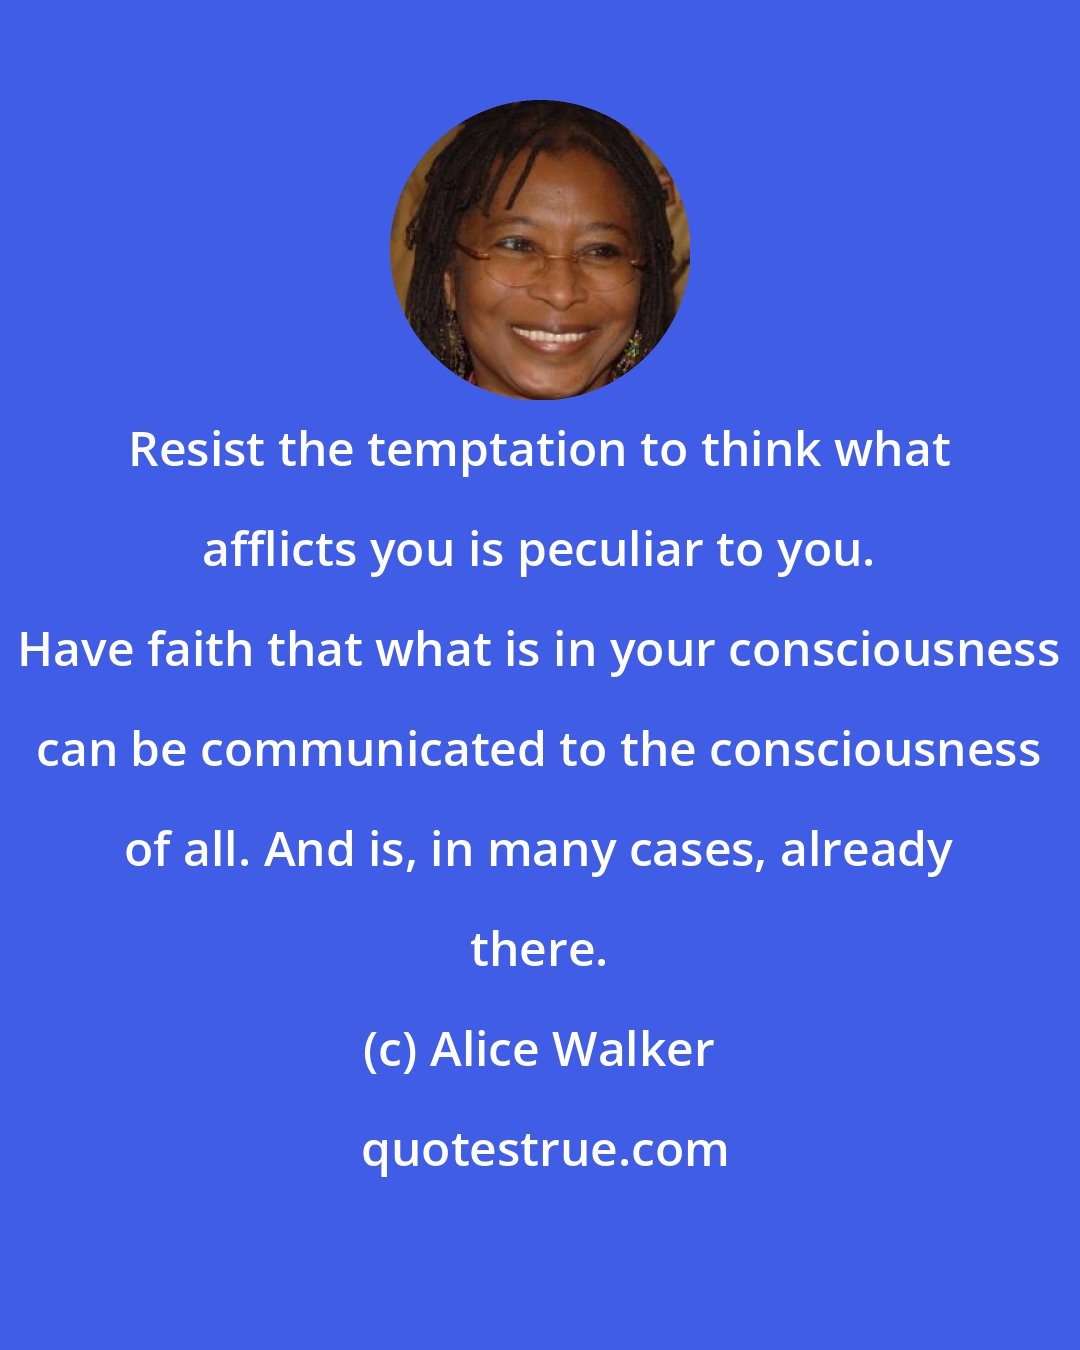 Alice Walker: Resist the temptation to think what afflicts you is peculiar to you. Have faith that what is in your consciousness can be communicated to the consciousness of all. And is, in many cases, already there.